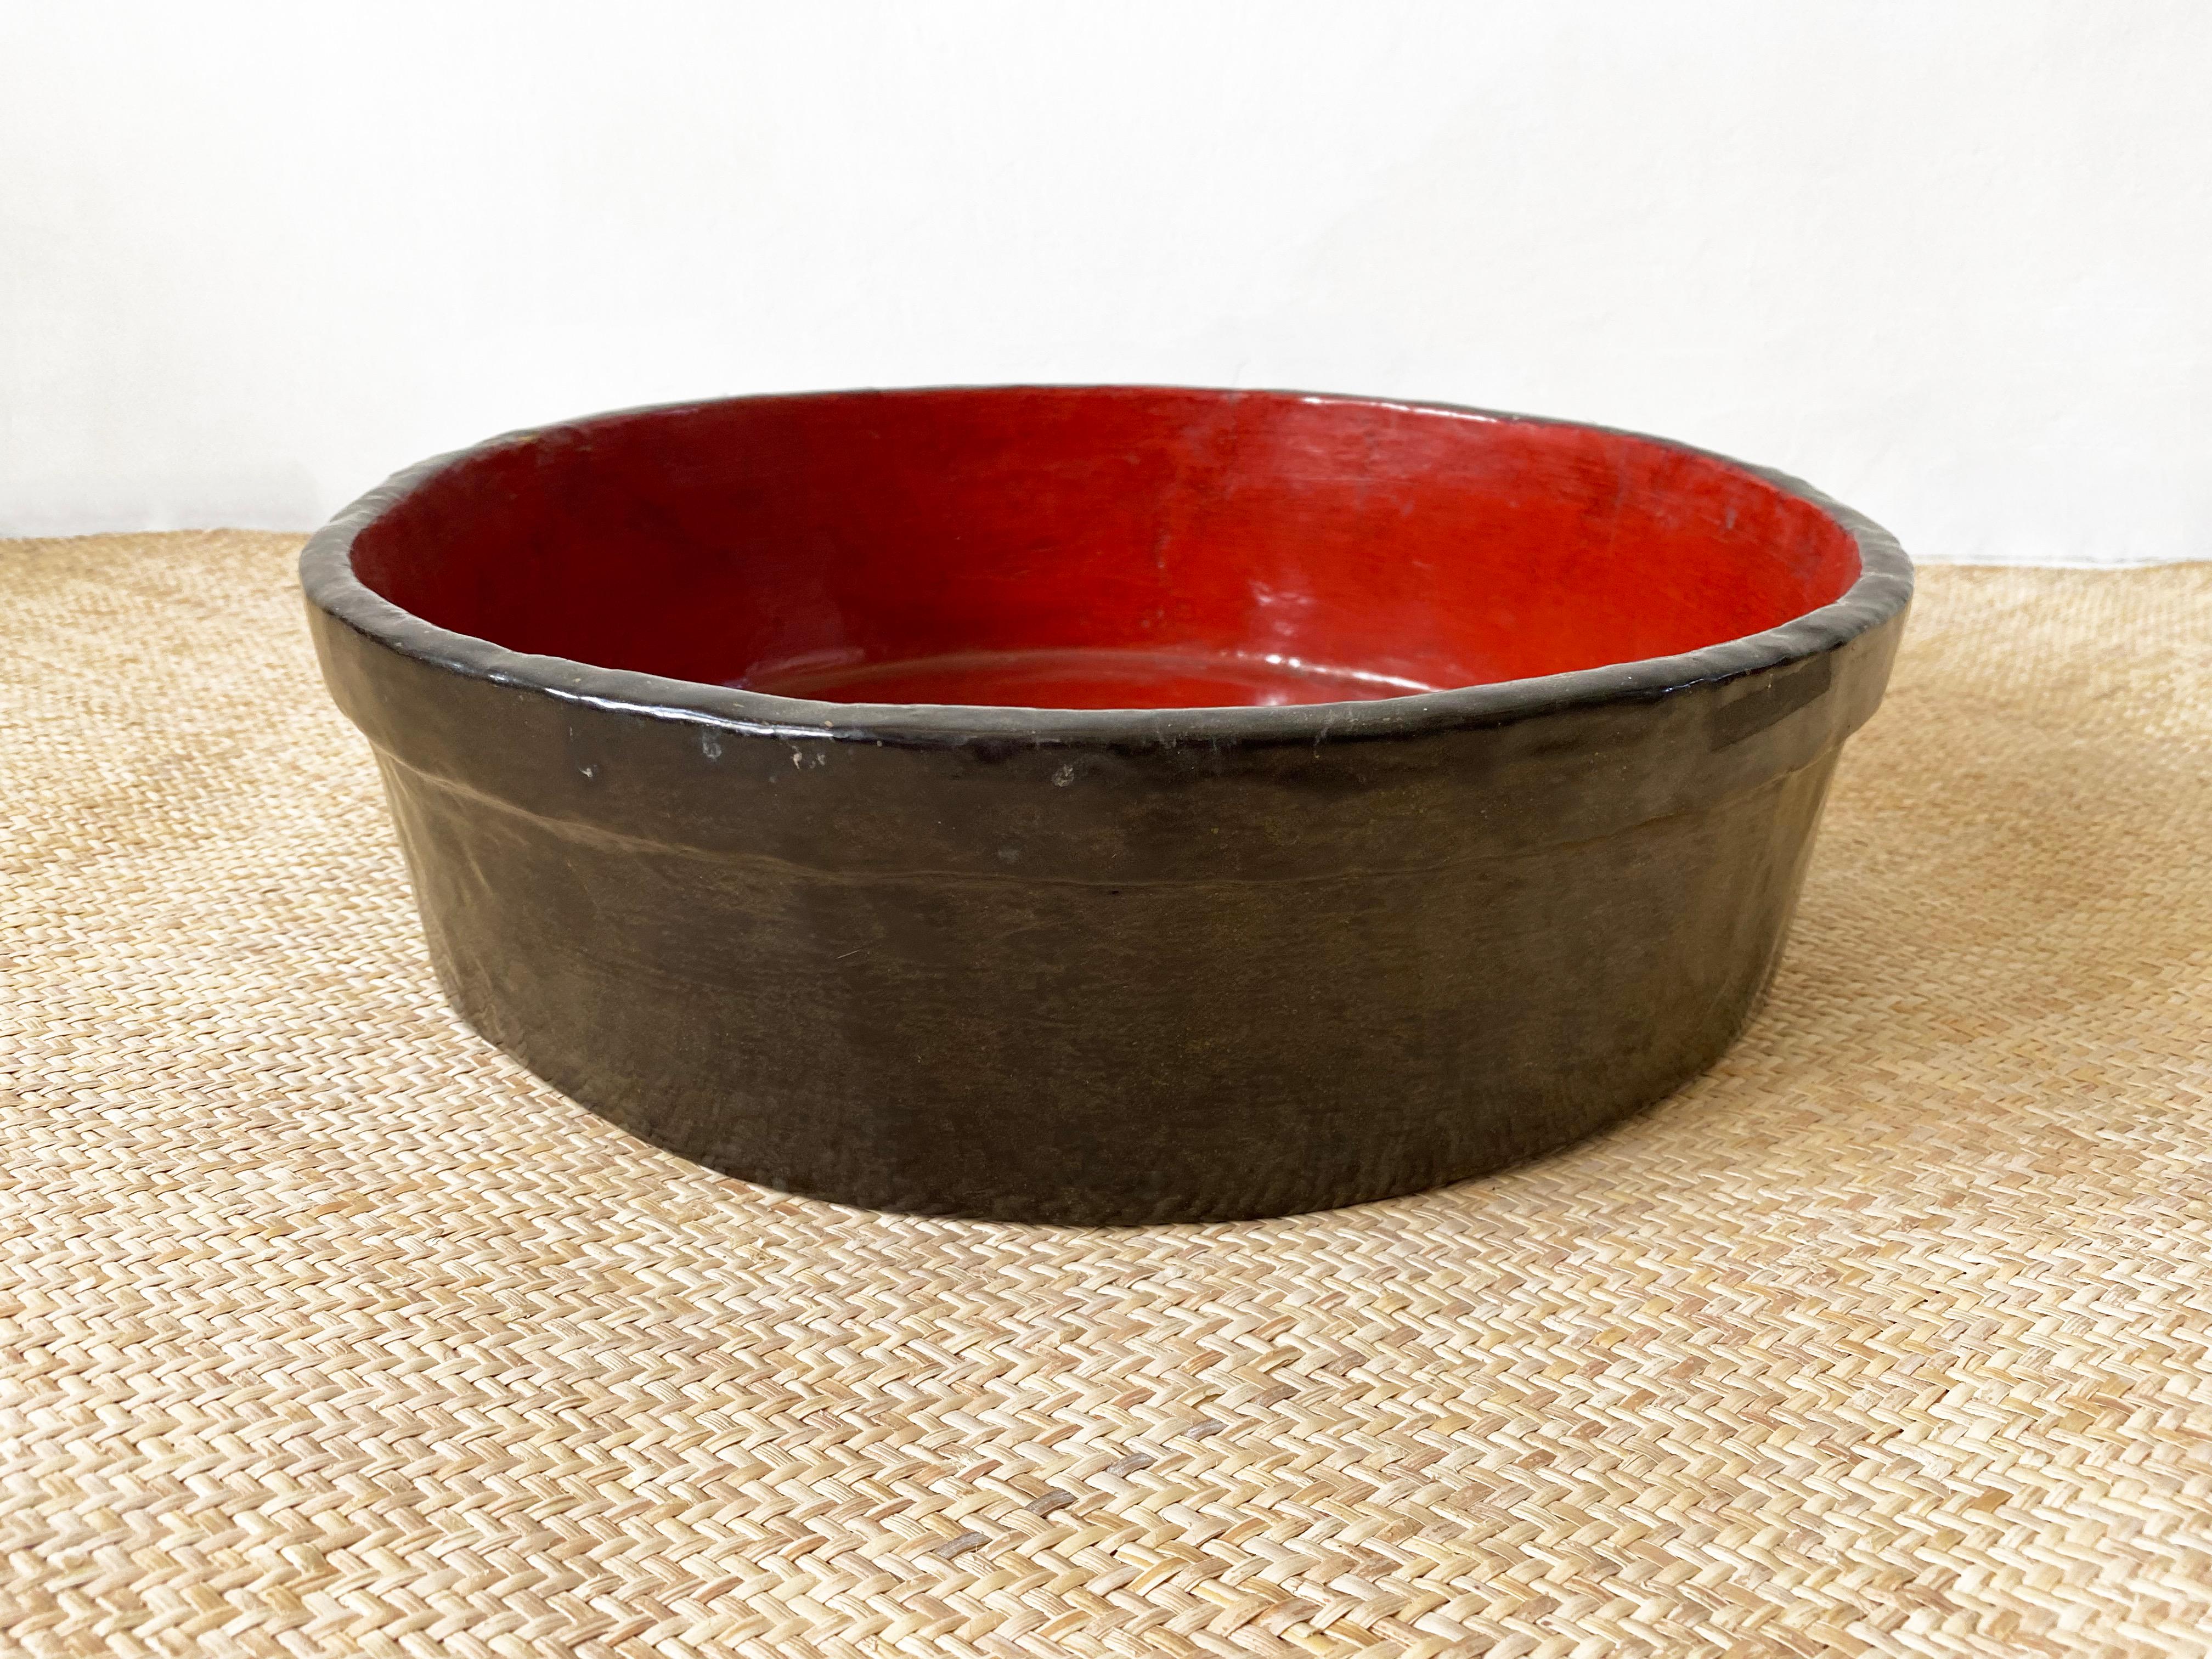 A Japanese red & black lacquer wooden bowl from the early 20th century. It is carved from a block of what is likely to be fruit wood. The bowl has aged beautifully over the years with small cracks and fading of the original lacquer.

The bowl is